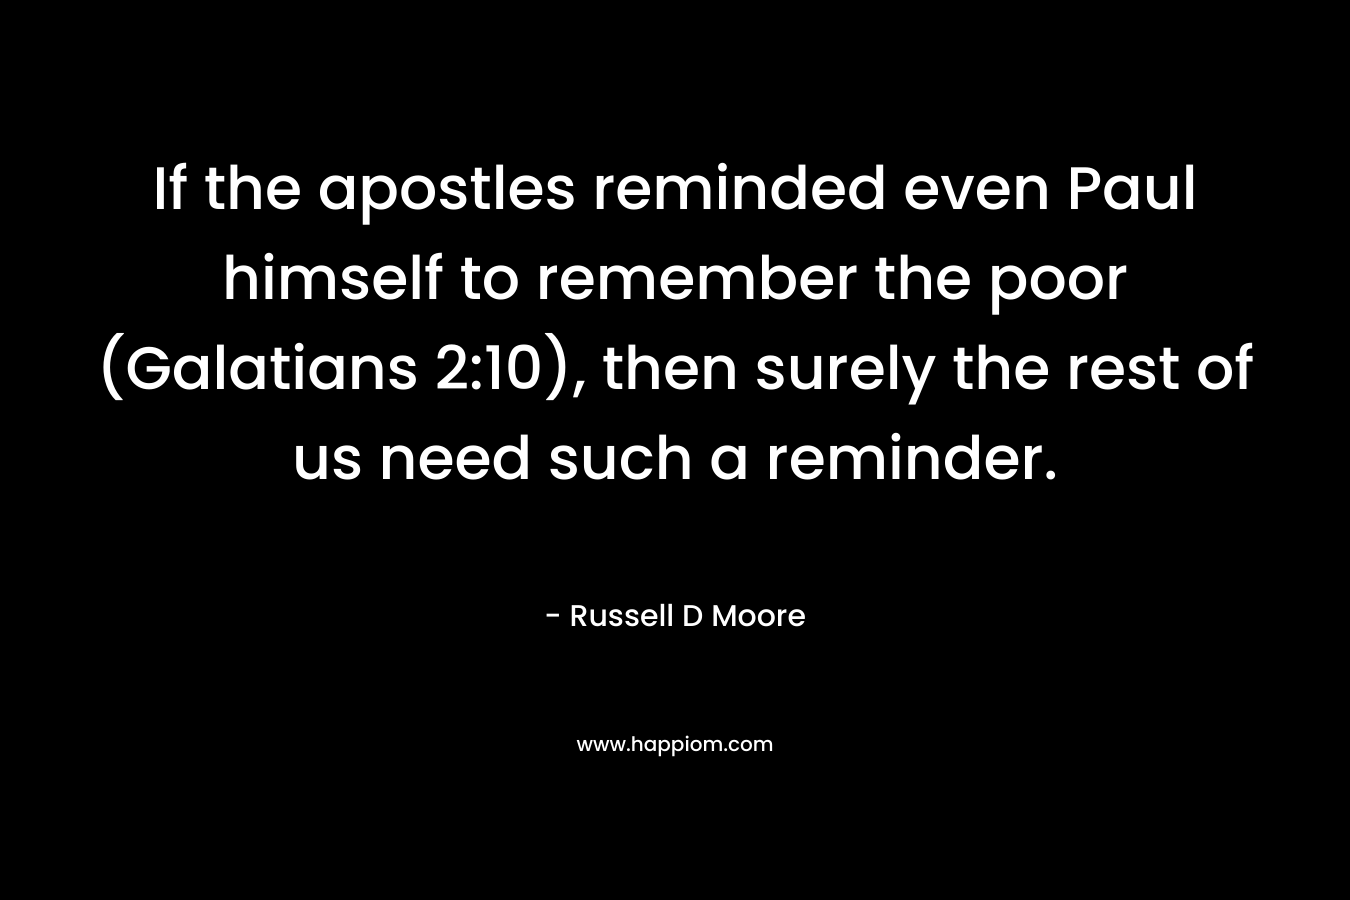 If the apostles reminded even Paul himself to remember the poor (Galatians 2:10), then surely the rest of us need such a reminder. – Russell D Moore